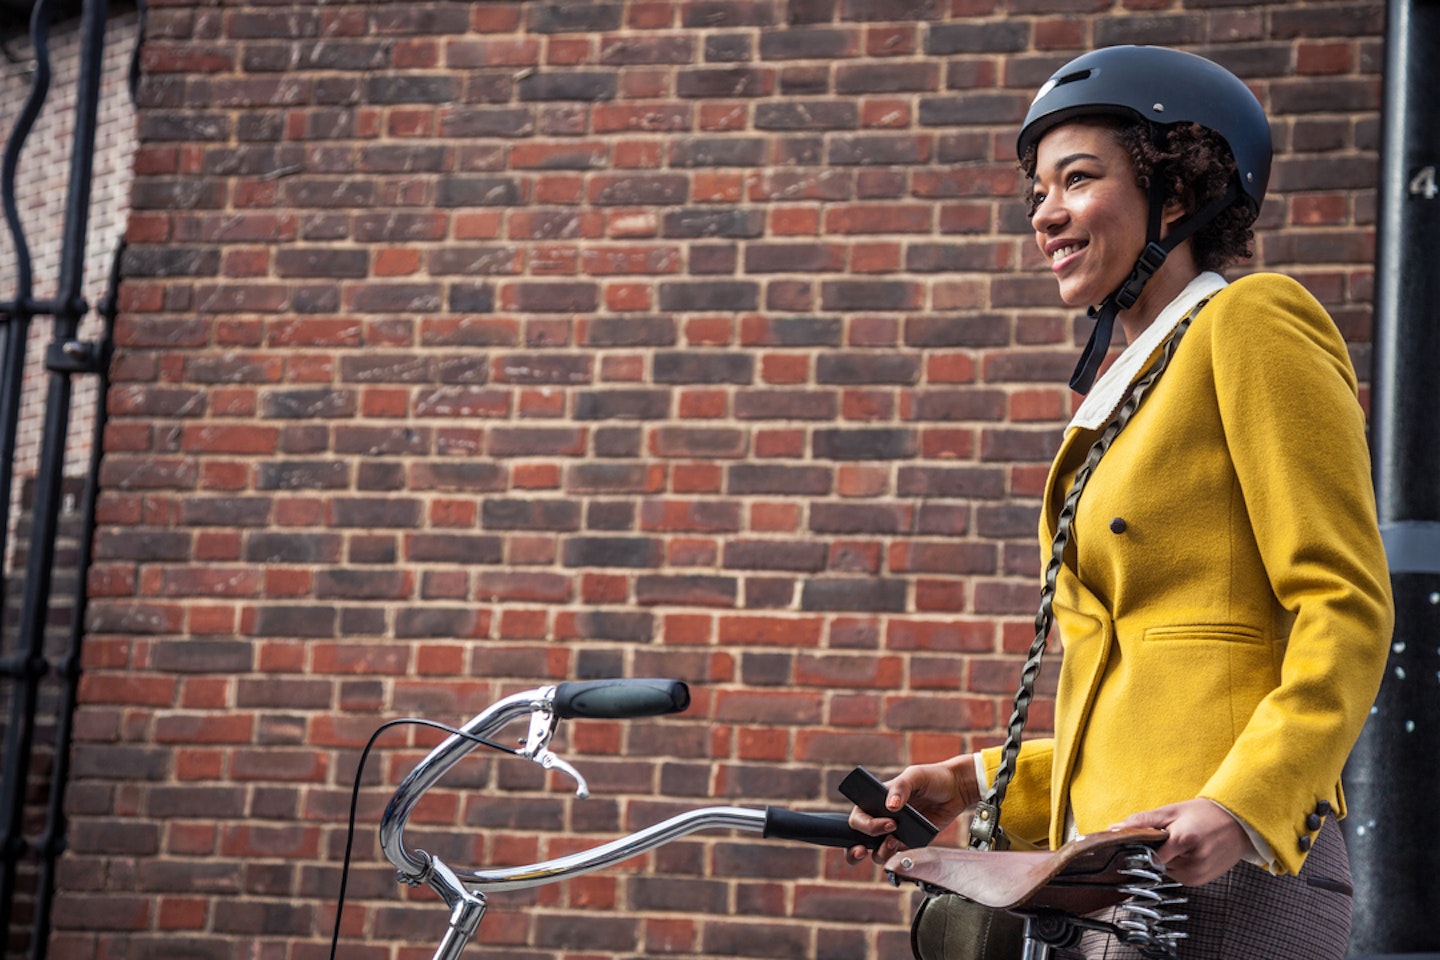 A woman wearing one of the best commuter cycling helmets against a brick wall